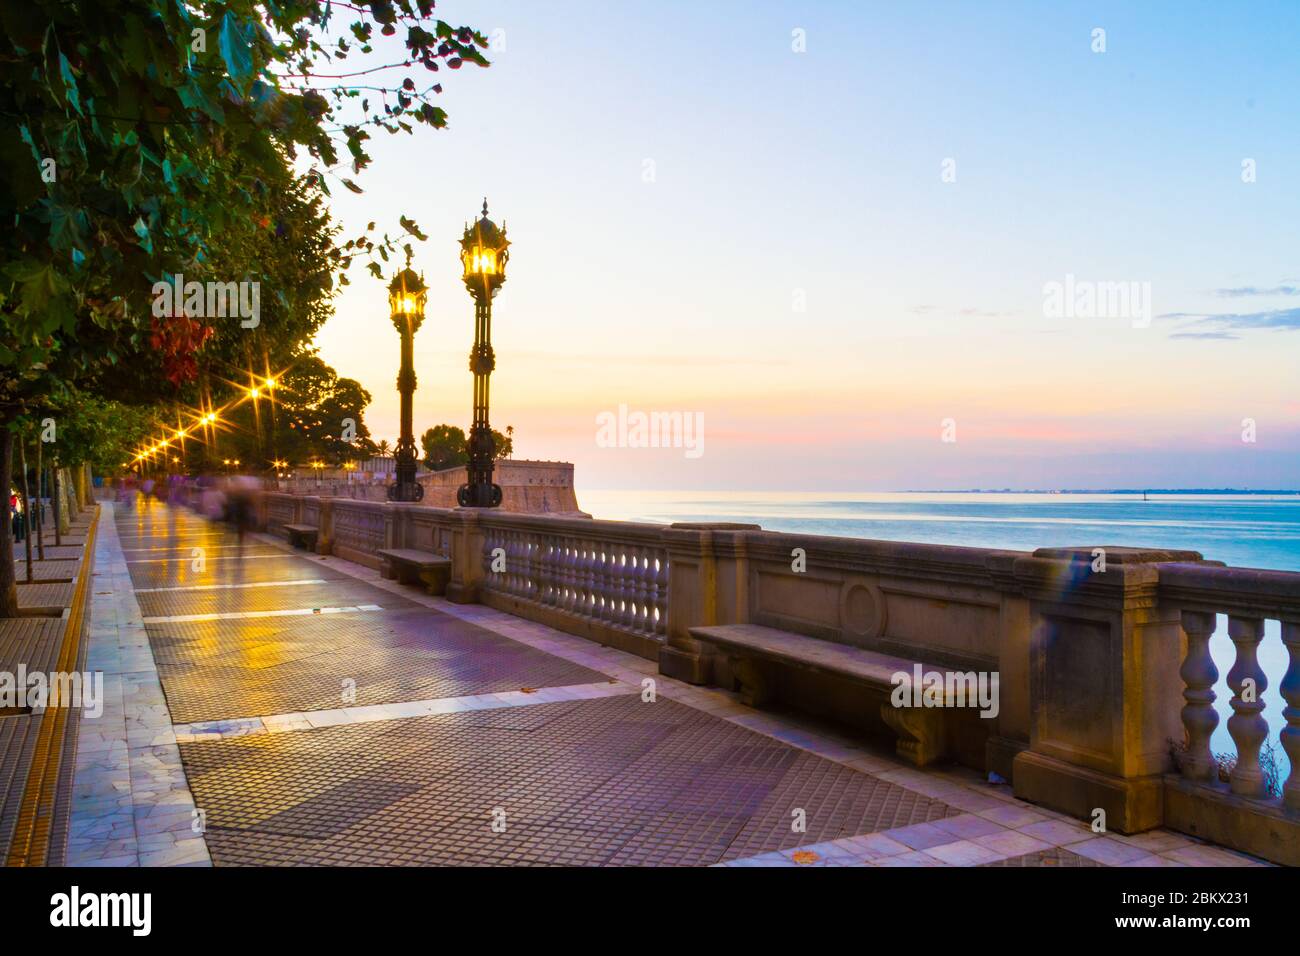 A colorful evening scene in a park in Cadiz, Spain with settle motion blurs of people and starburst in every street light. Stock Photo